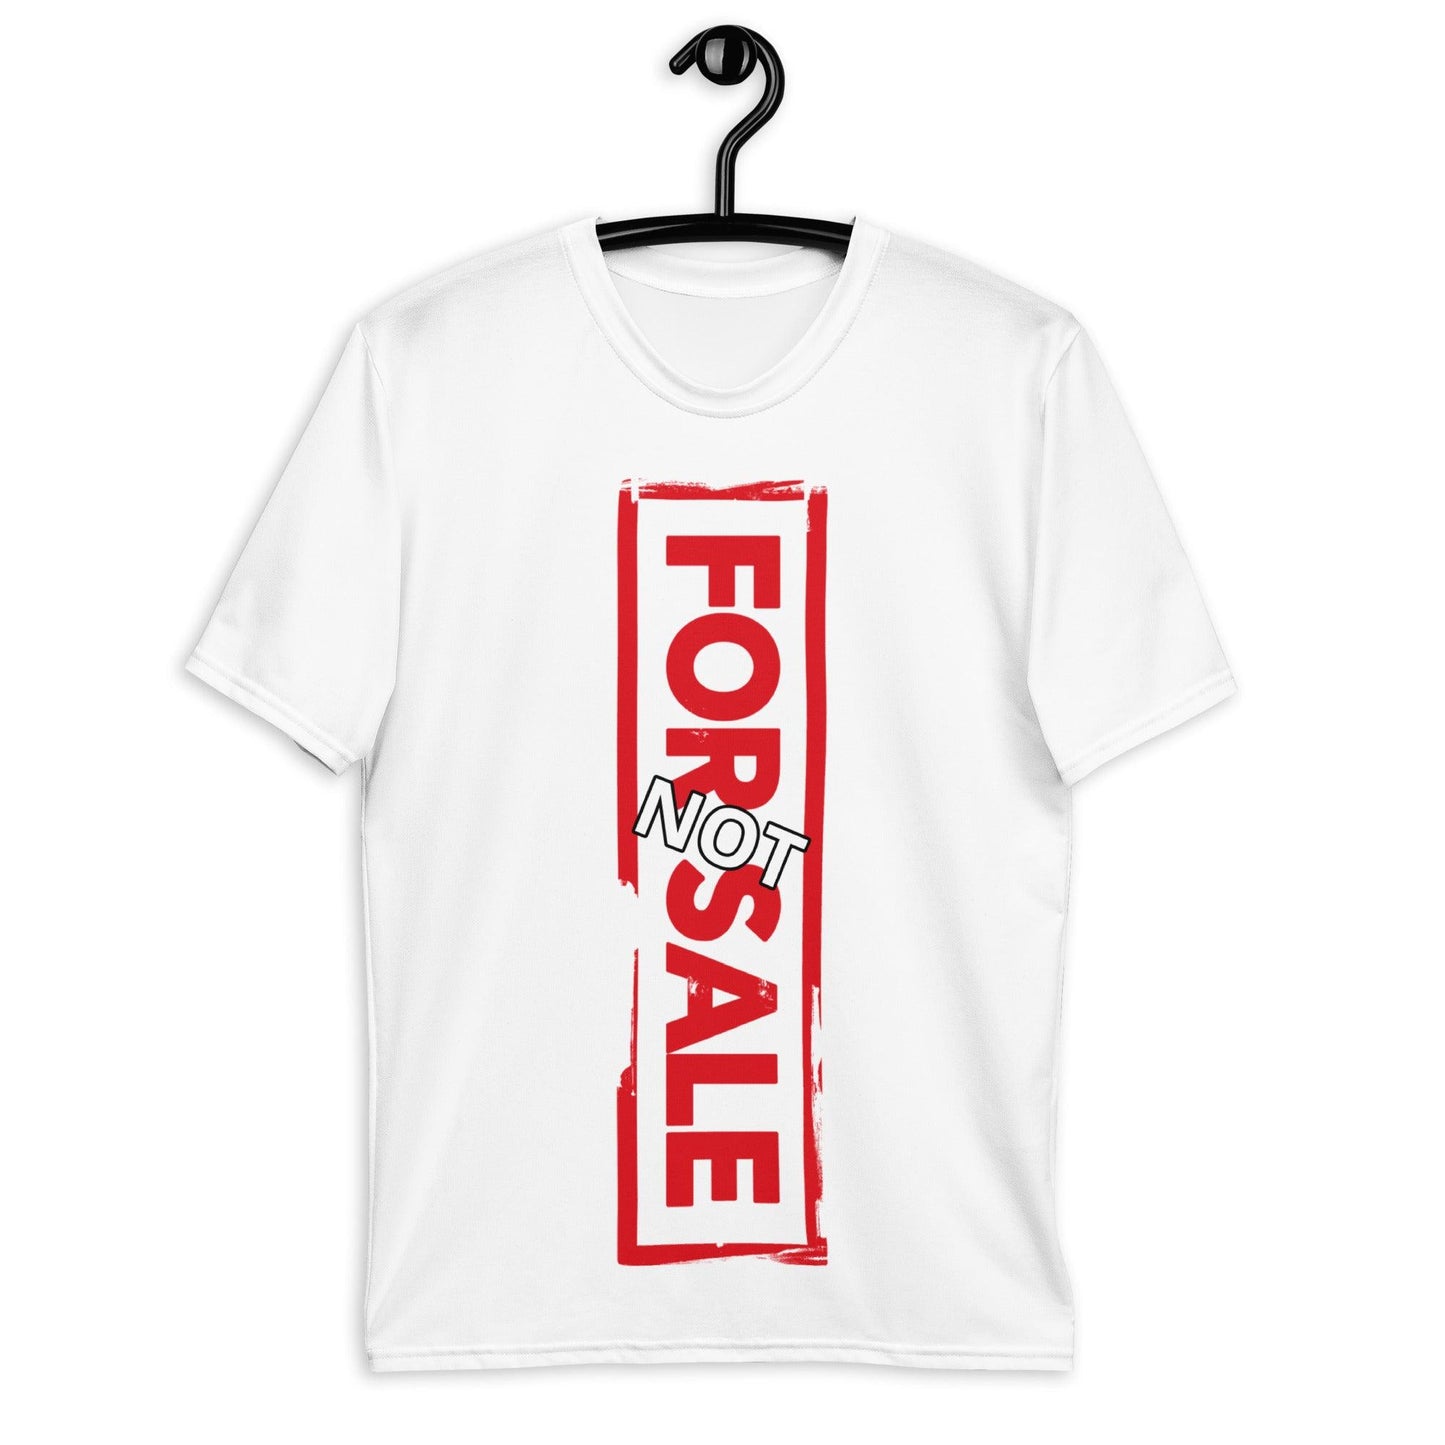 Not For Sale Red Stamp - Mens T-Shirt - iSAW Company